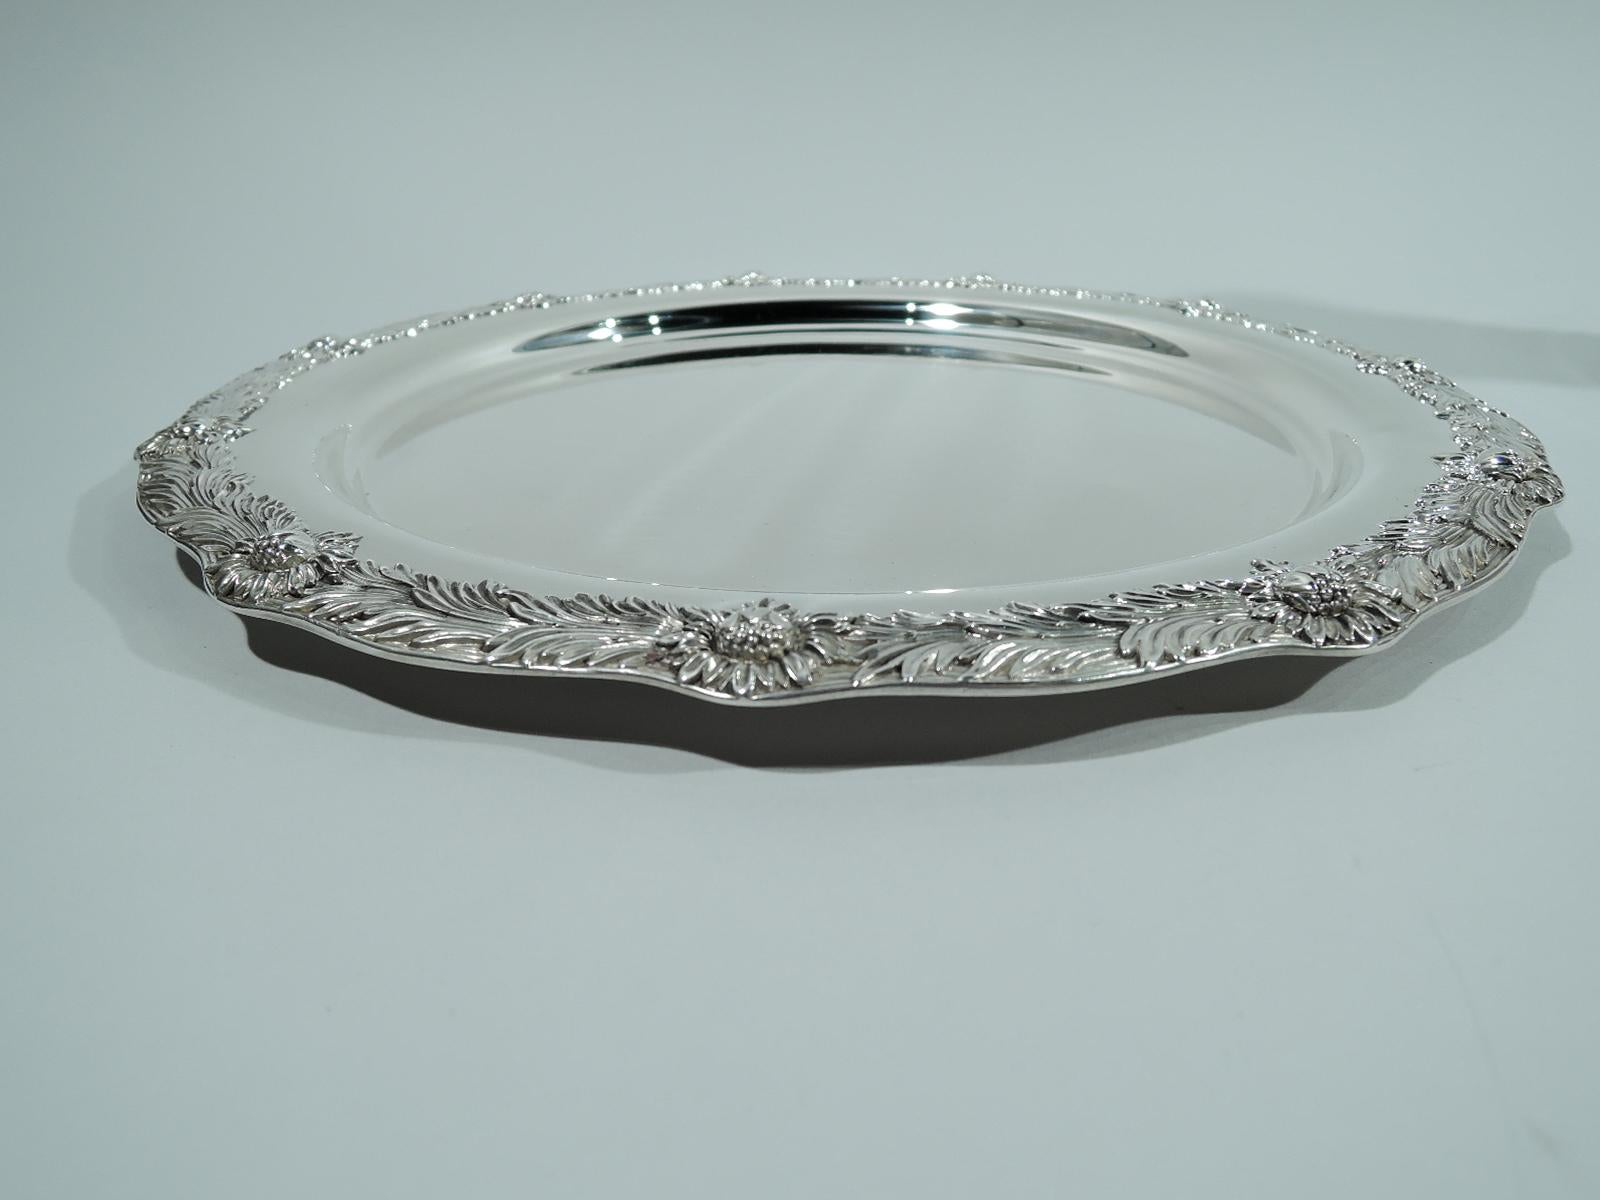 Chrysanthemum sterling silver tray. Made by Tiffany & Co. in New York, ca 1910. Round with plain well; shoulder has dense and orderly arrangement of flower heads and leaves. Gently wavy rim. A great piece in a desirable pattern that was first